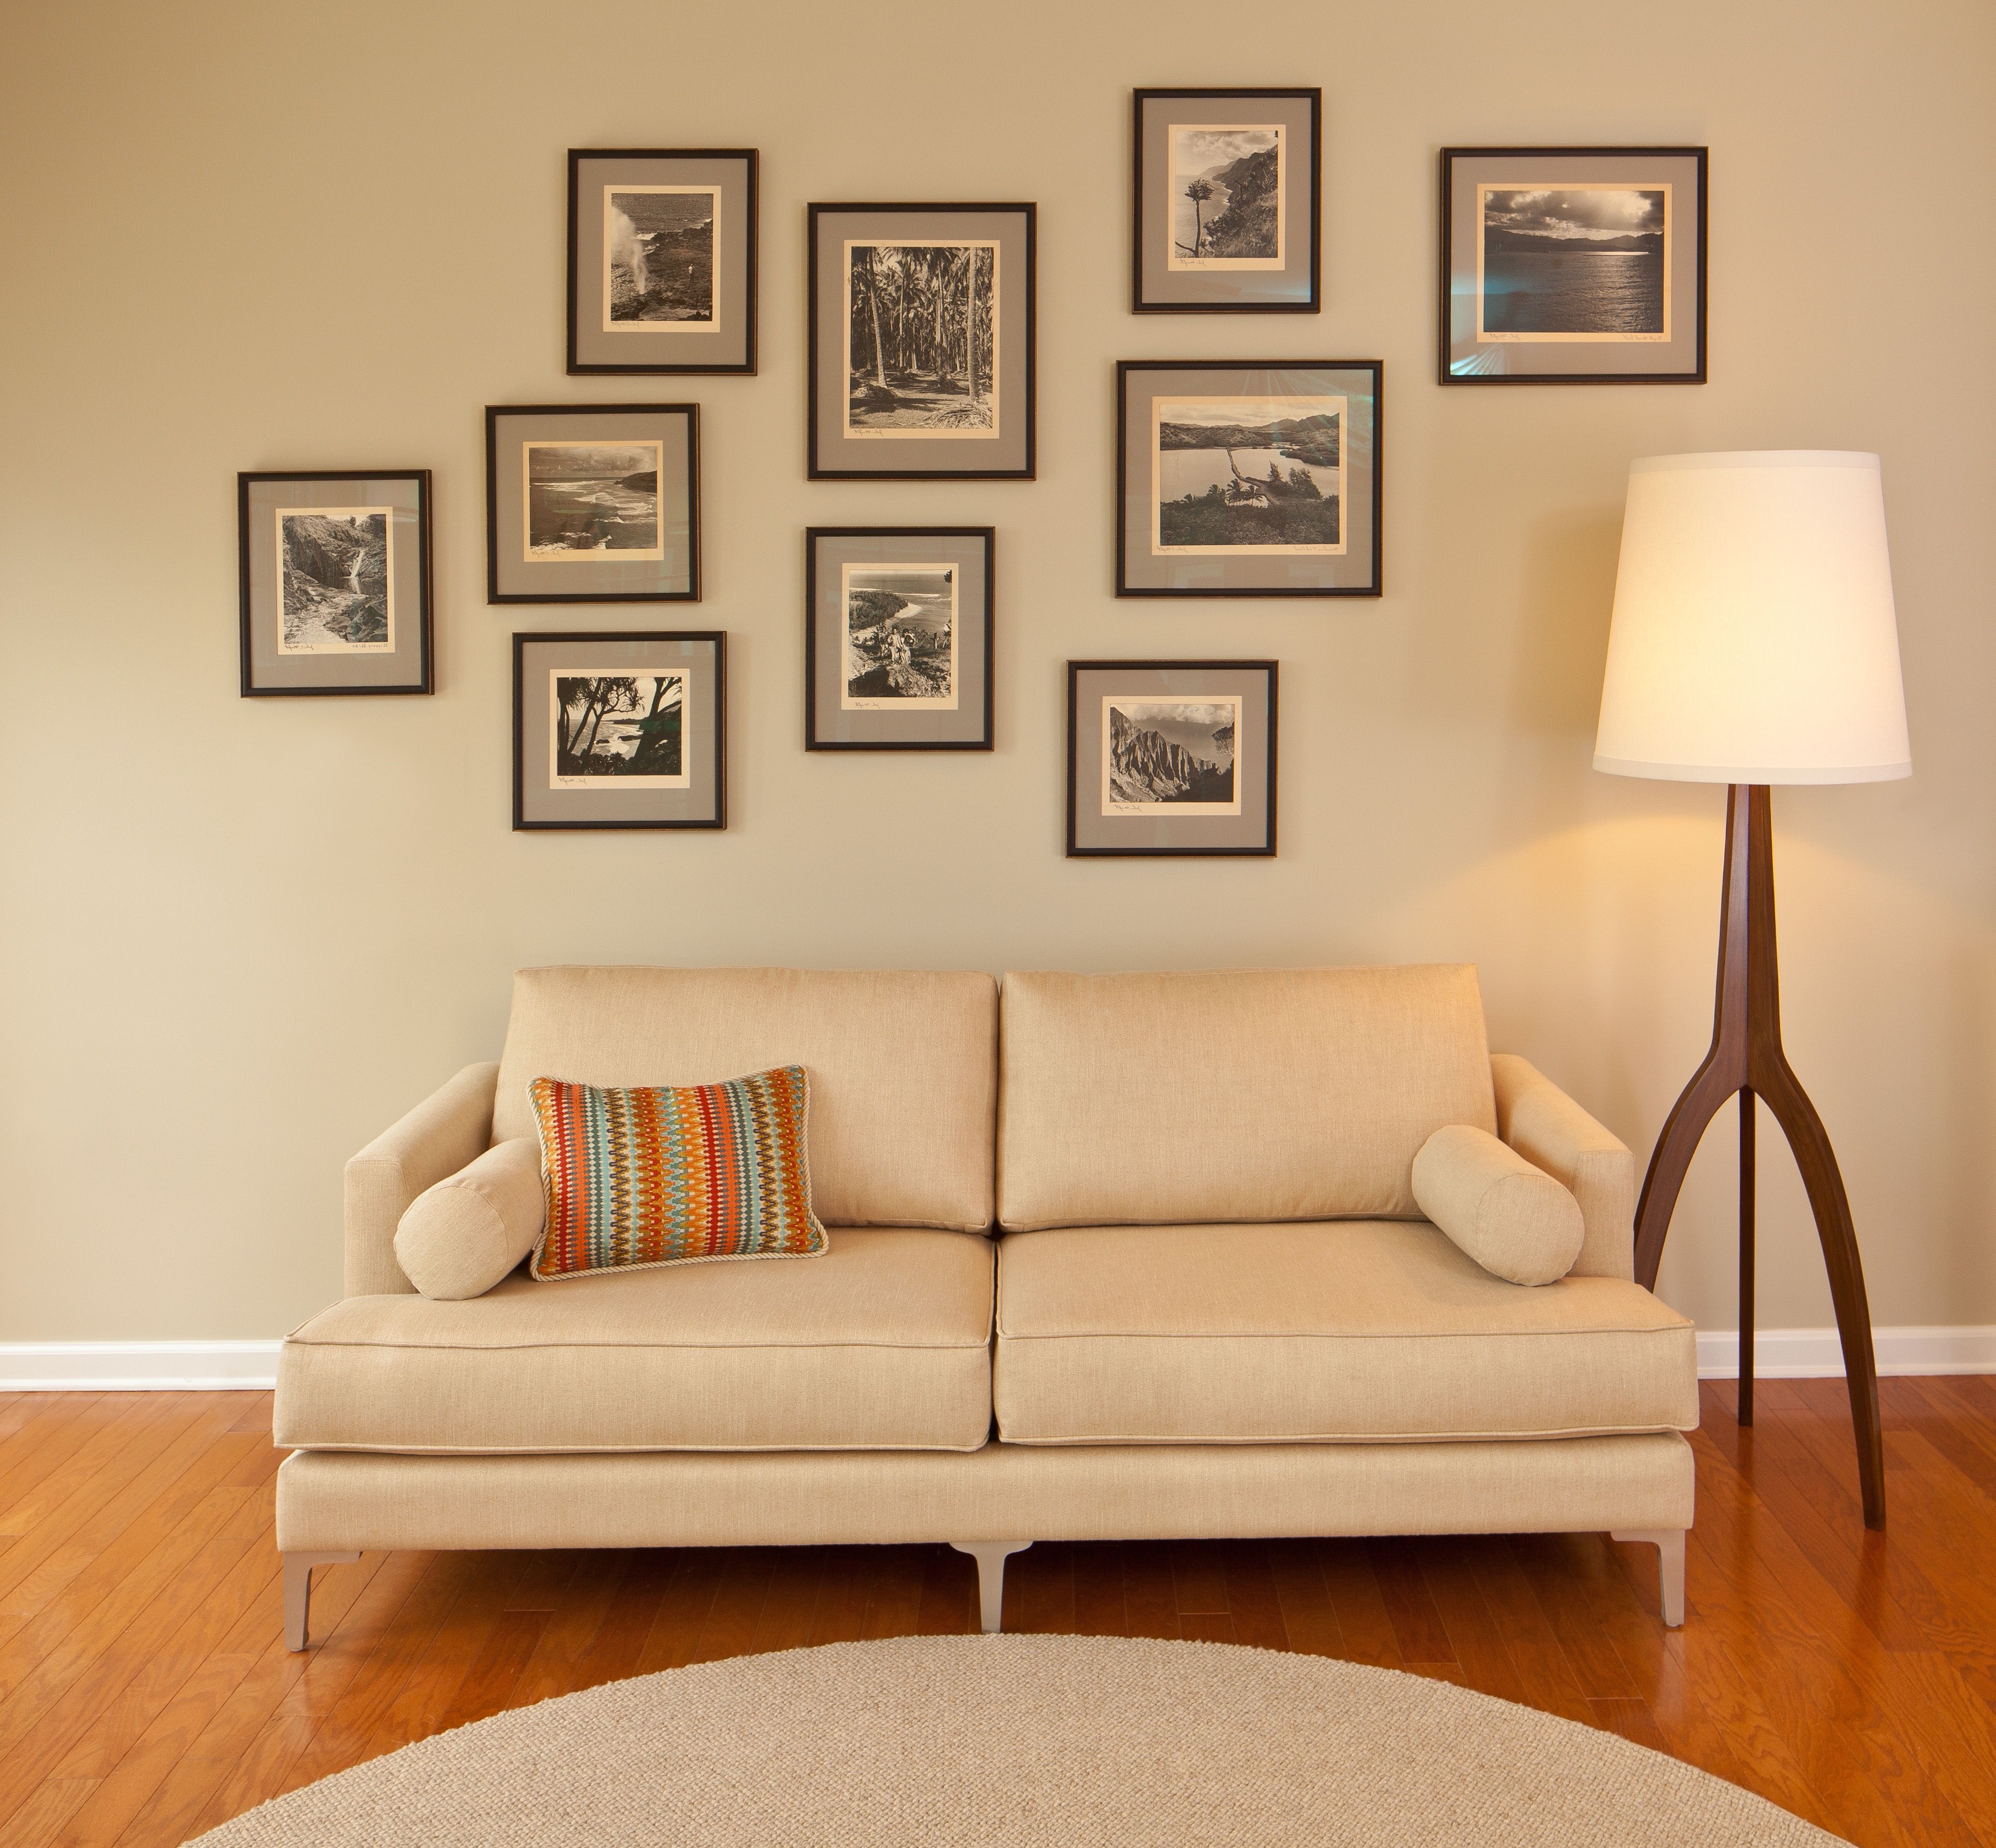 Living Room Framed Gallery Wall Decor With Unique Floor Lamp (View 14 of 30)